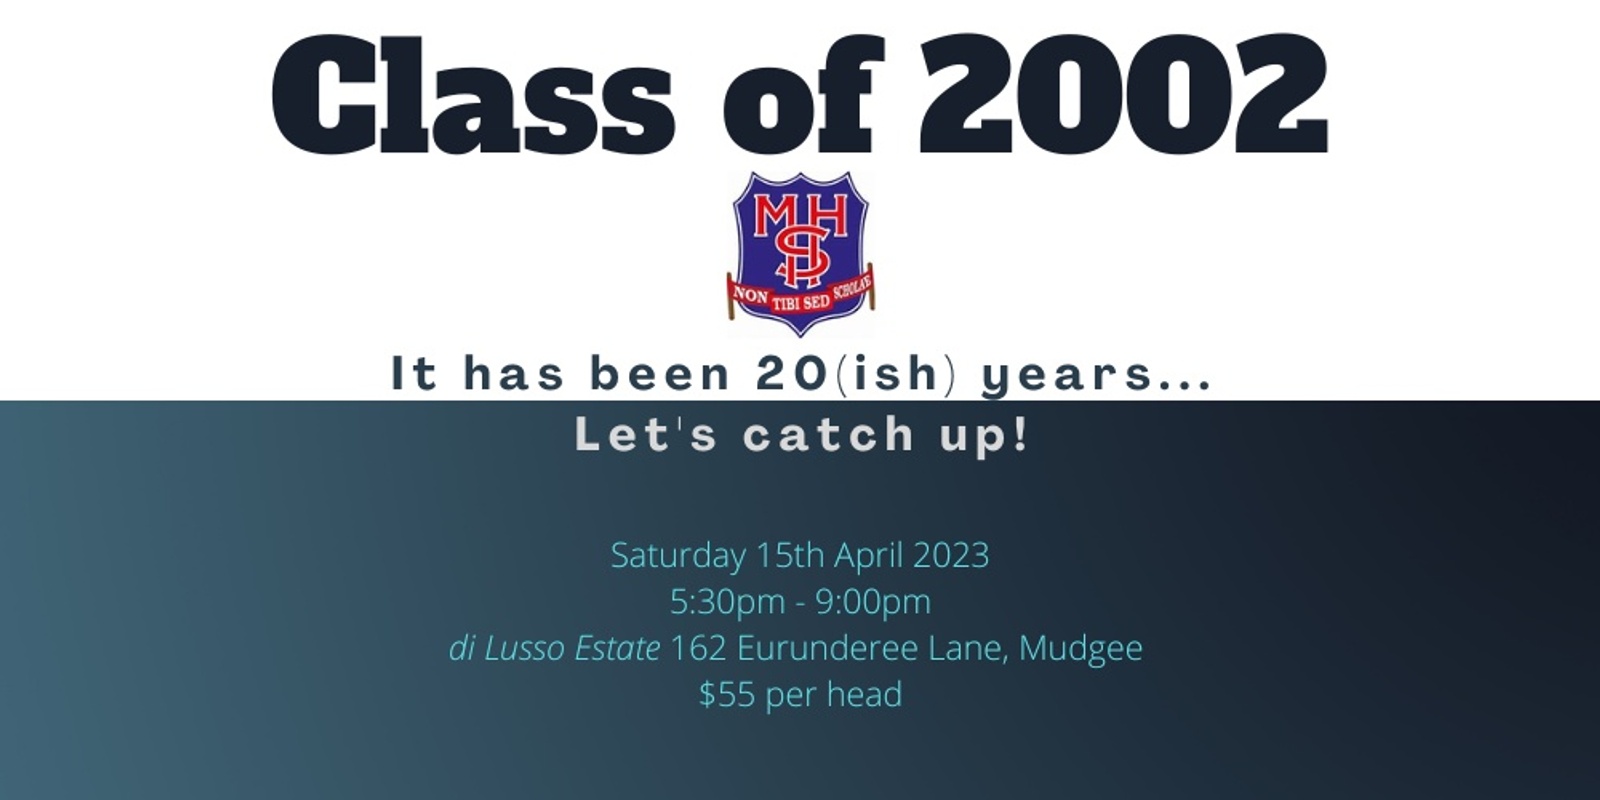 Banner image for Mudgee High Class of 2002 Reunion